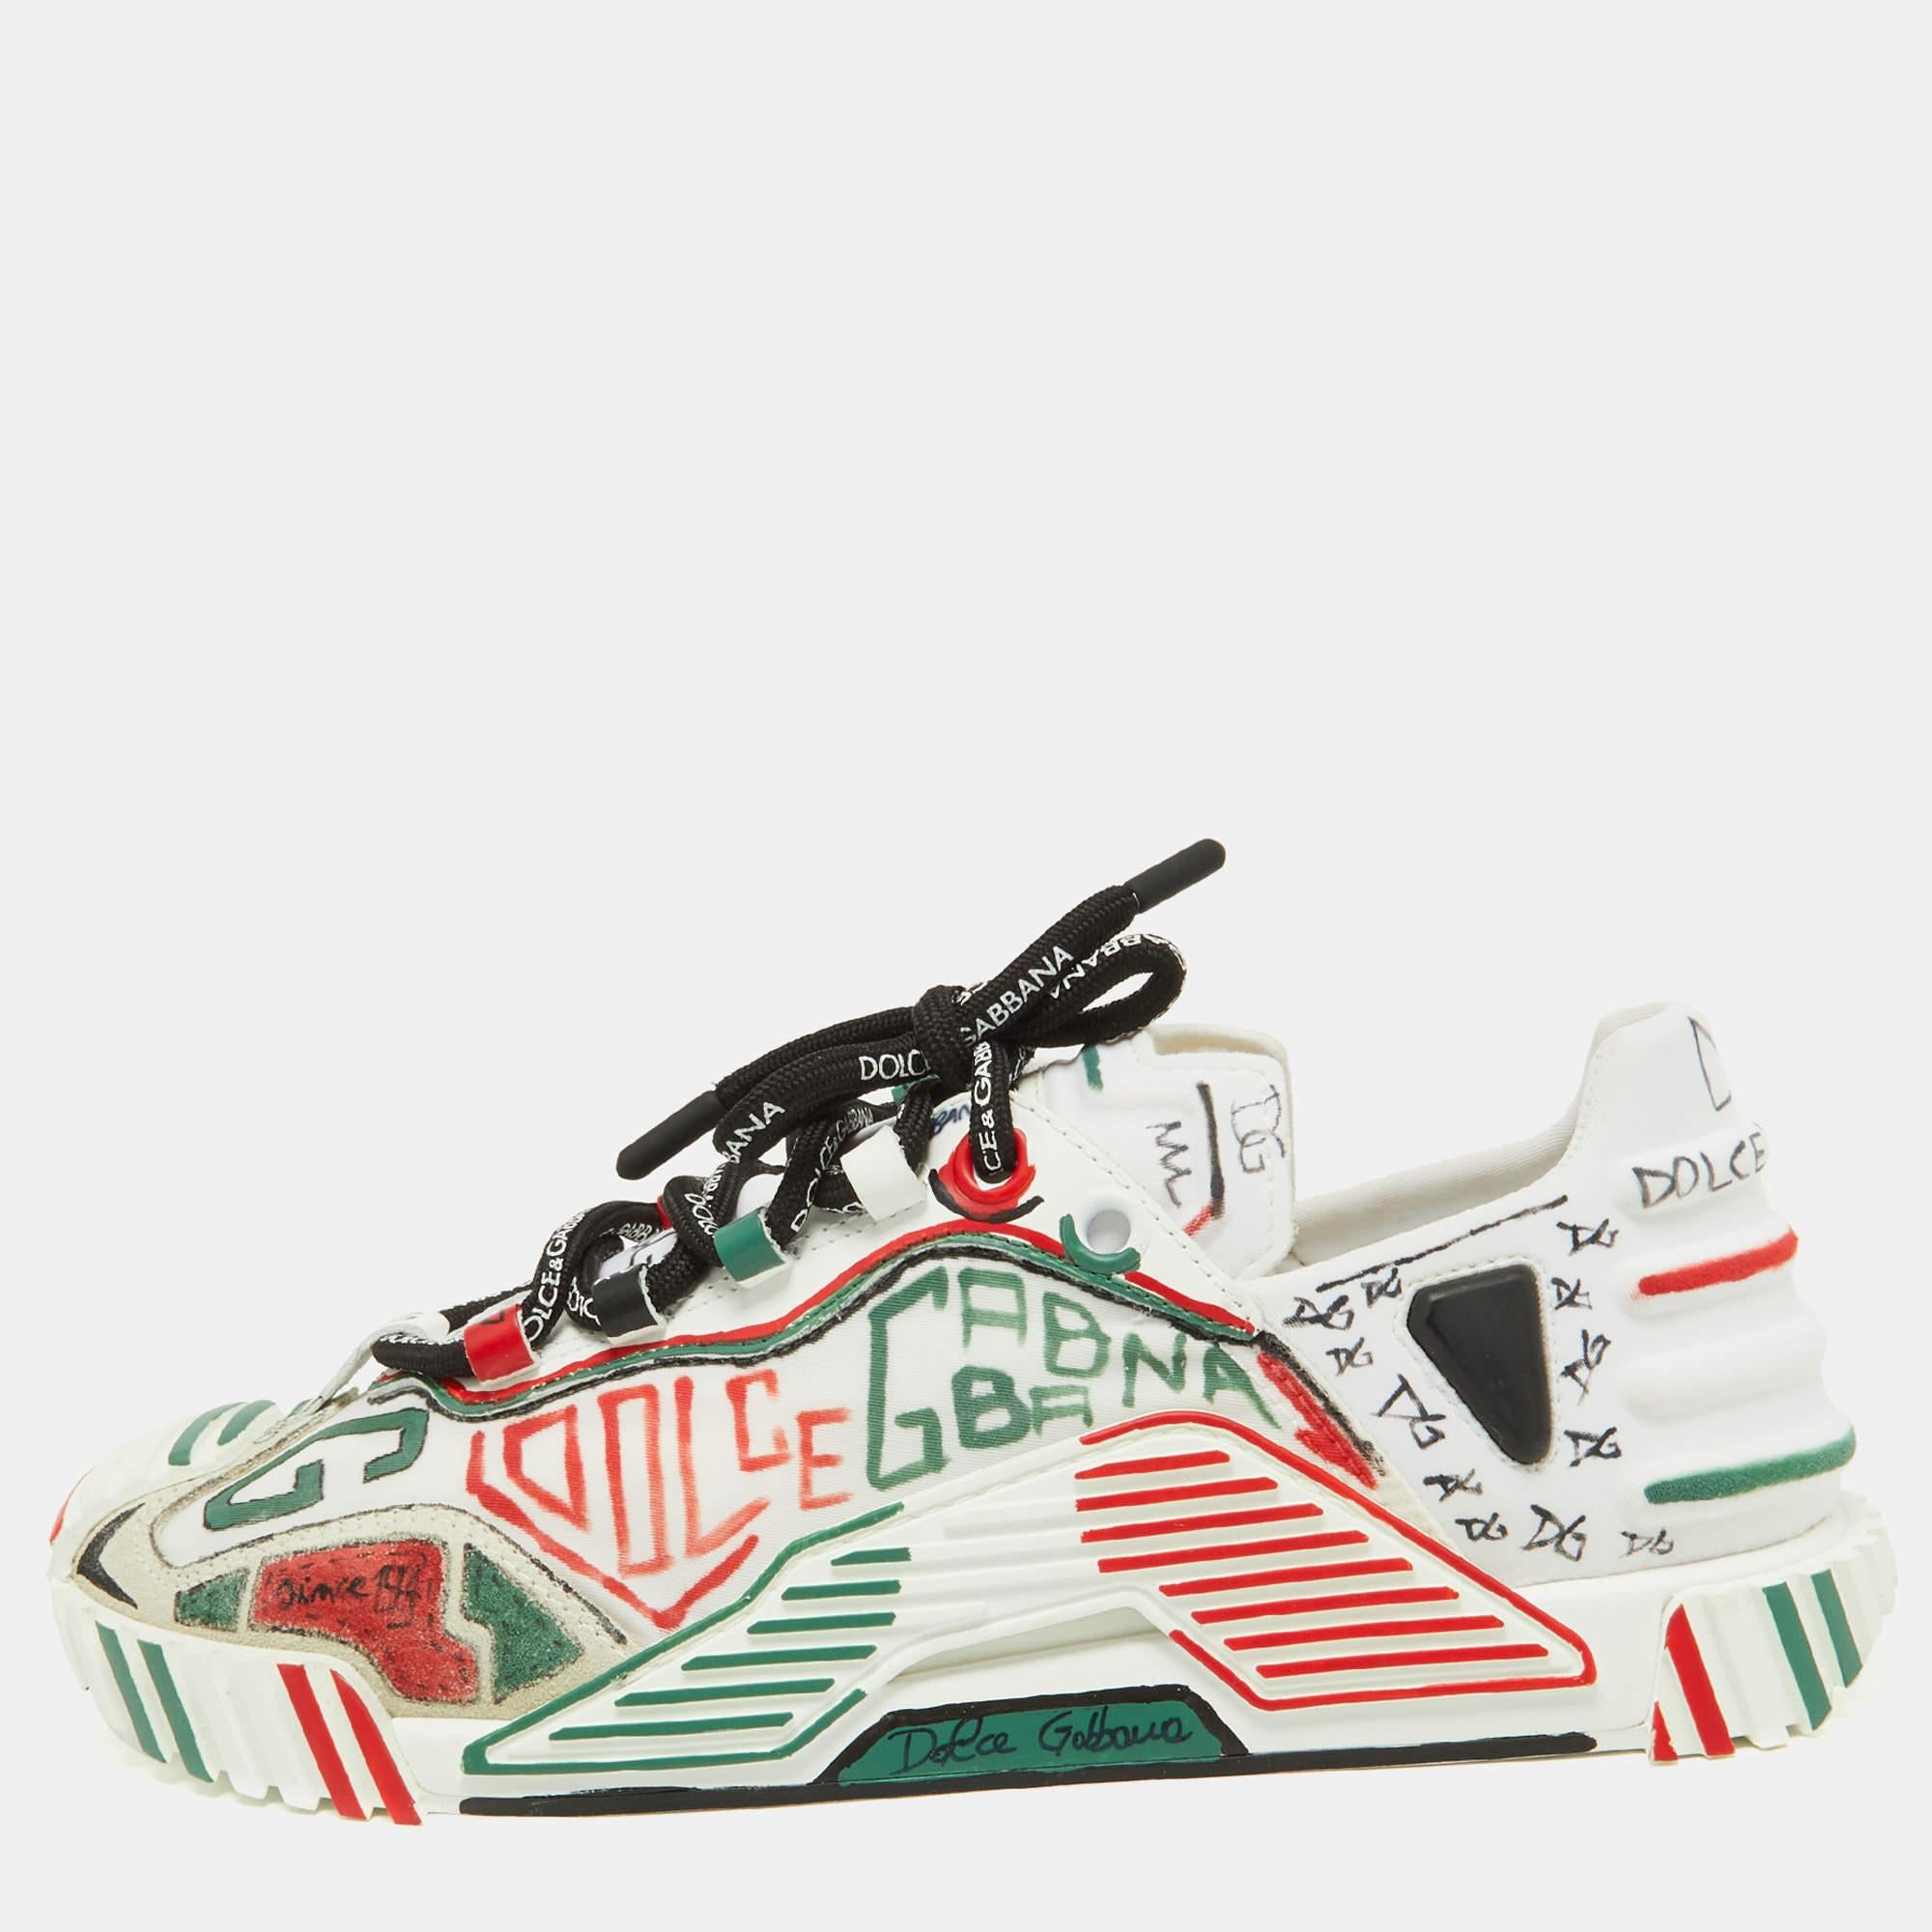 Dolce & Gabbana Multicolor Neoprene and Suede Miami Ns1 Low Top Sneakers Size 38 For Sale 4